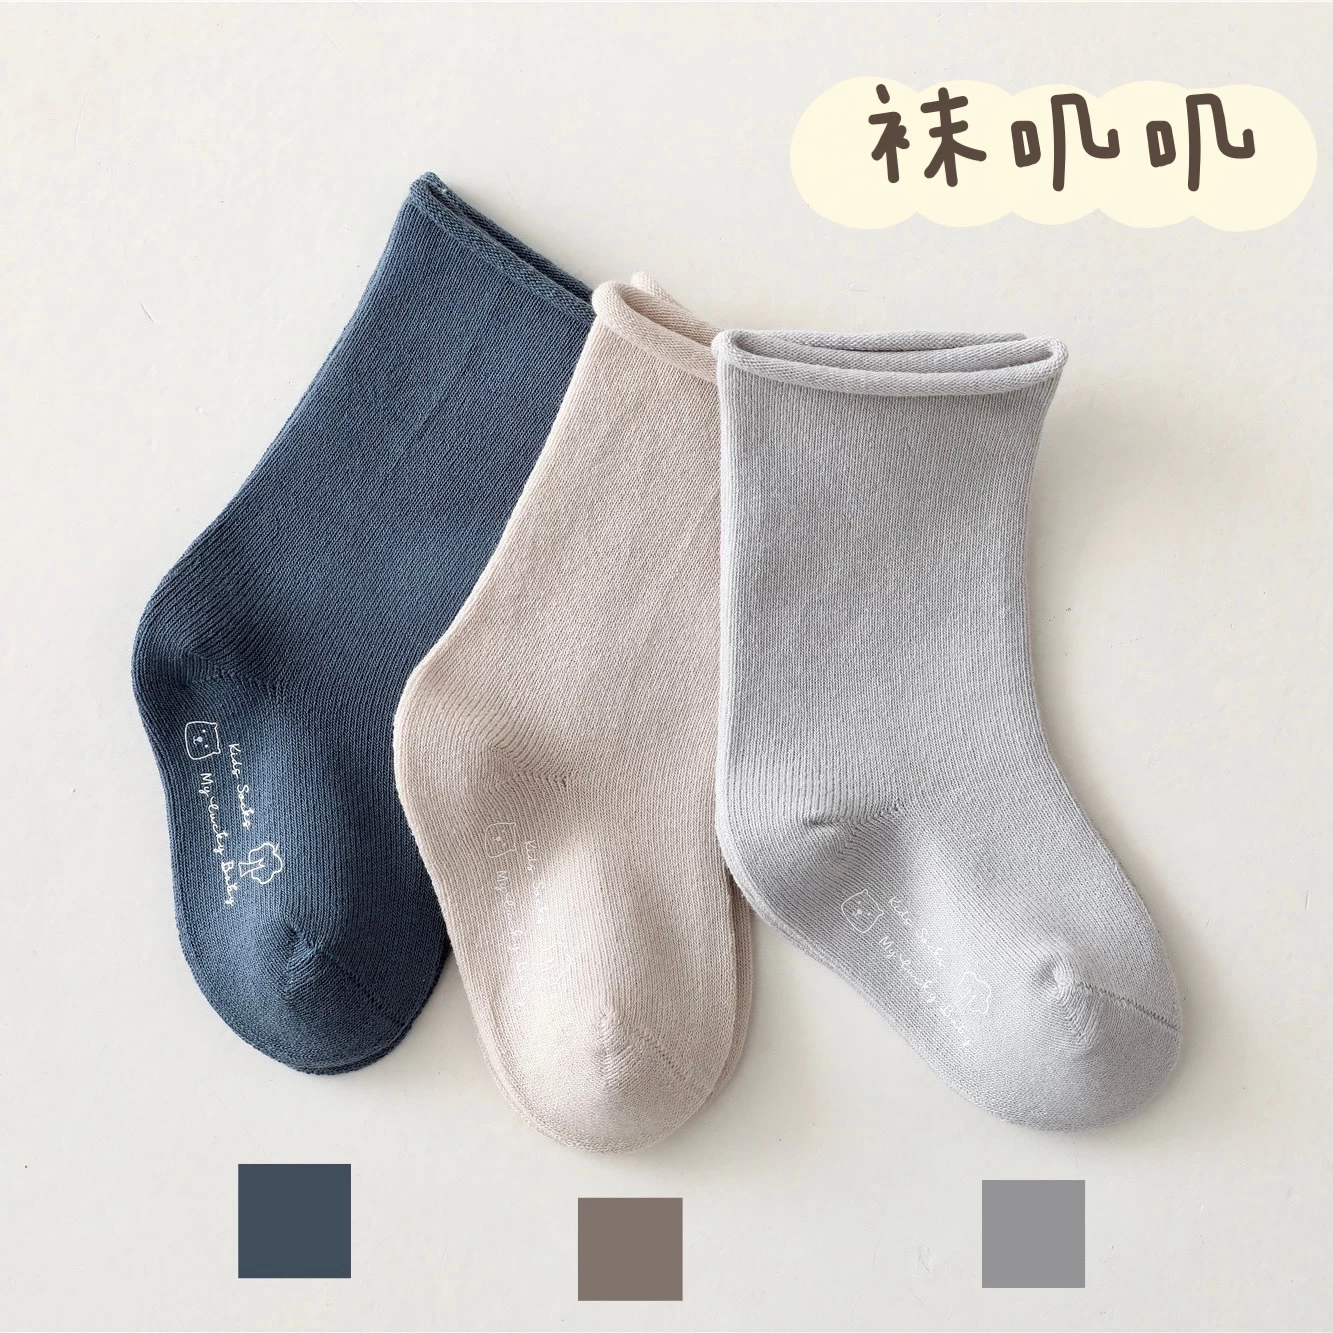 Baby socks that take care of your baby's growth. Welcome to the factory for wholesale and purchase